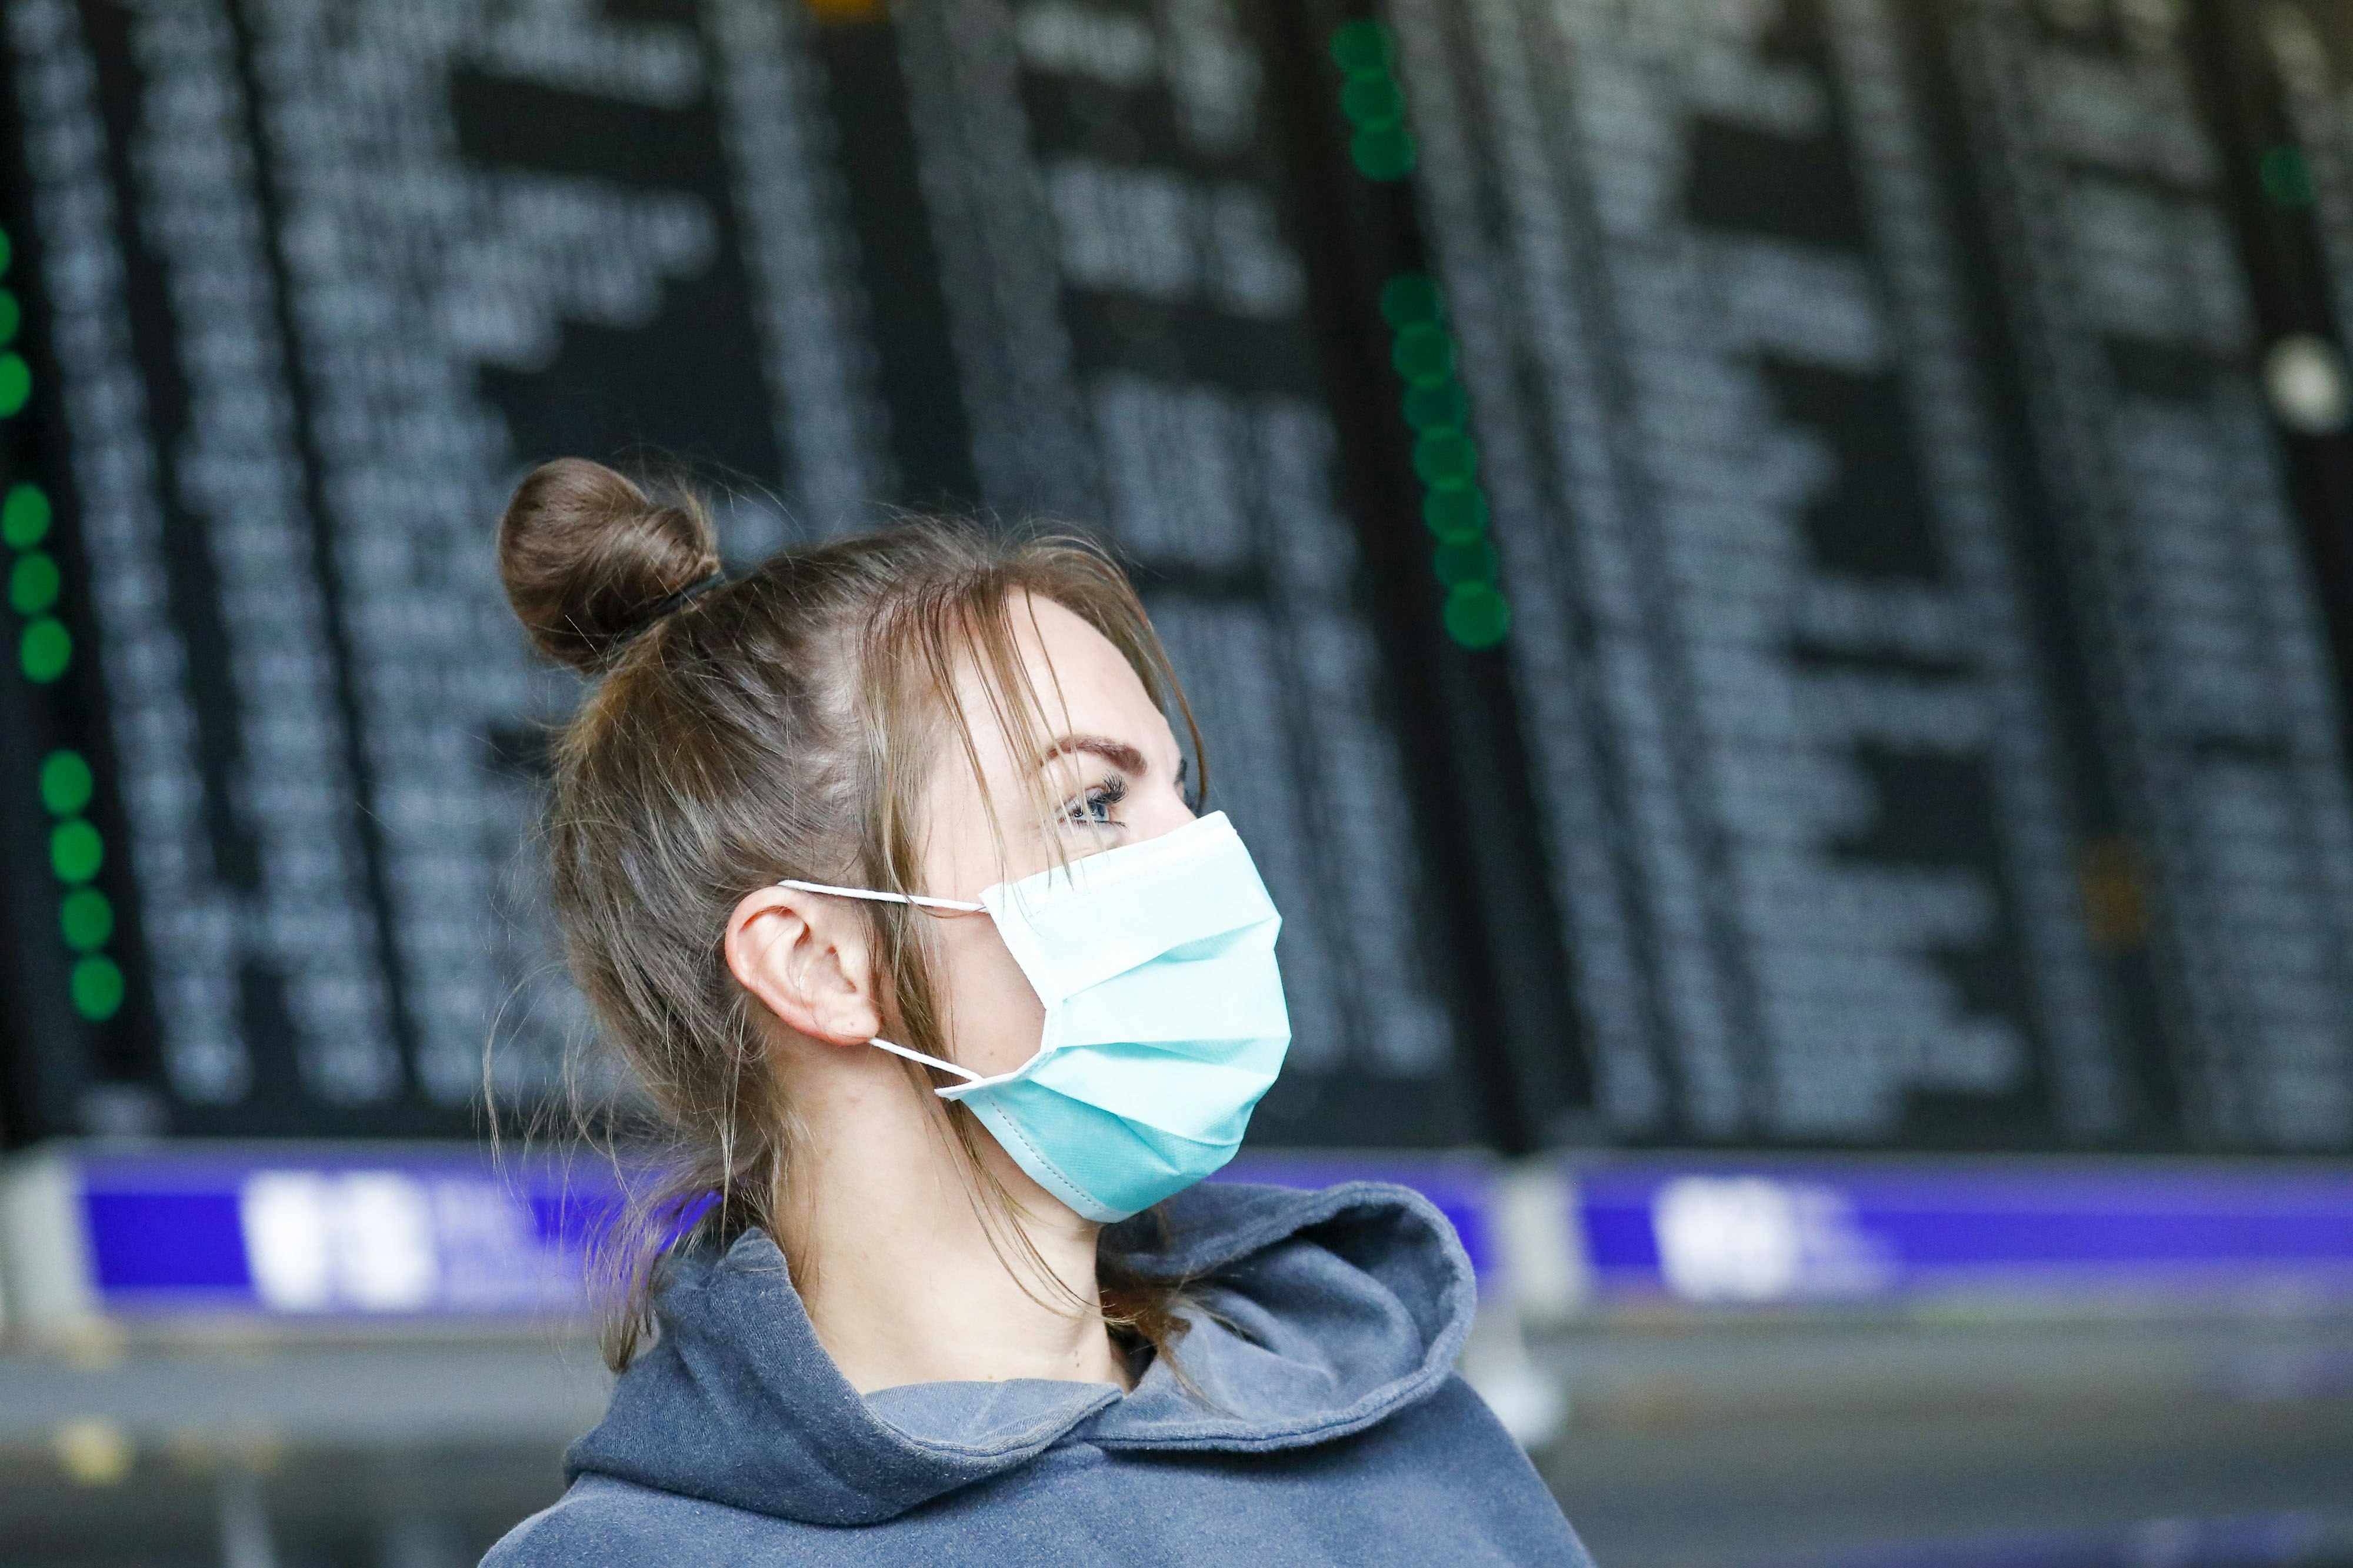 Female passenger wearing a face mask in front of an airport departures screen